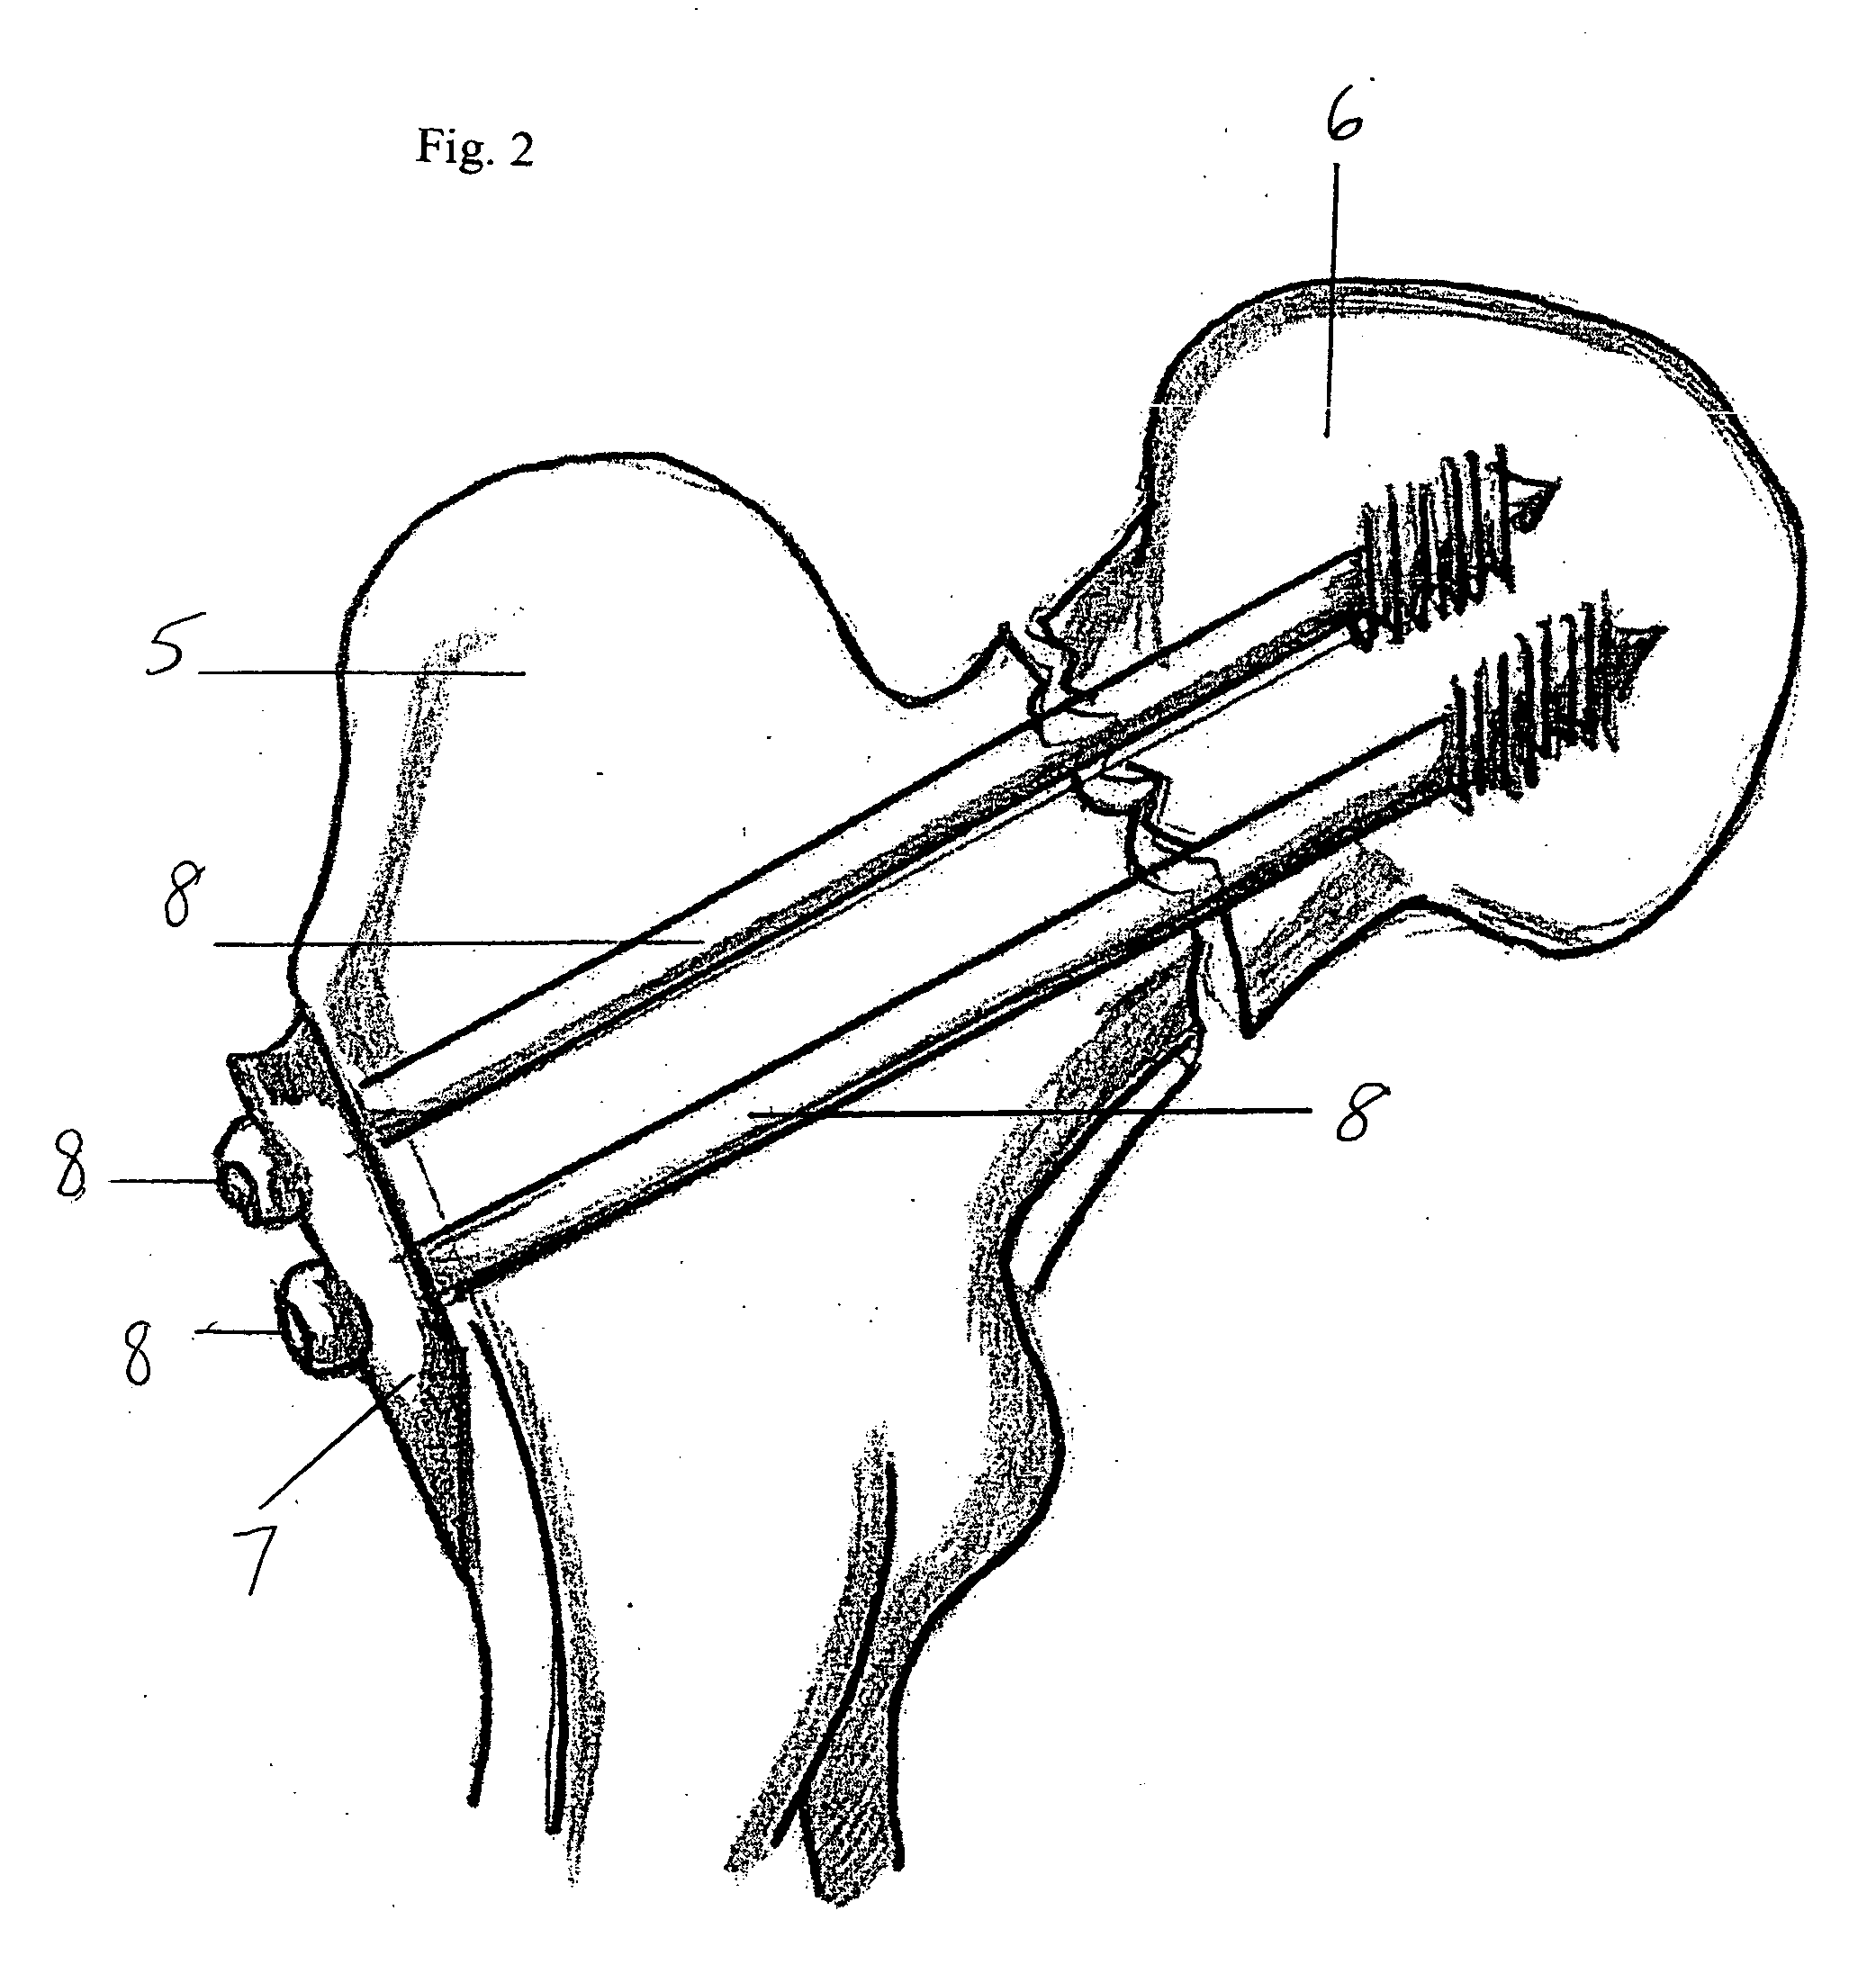 Bone plating system for treatment of hip fractures